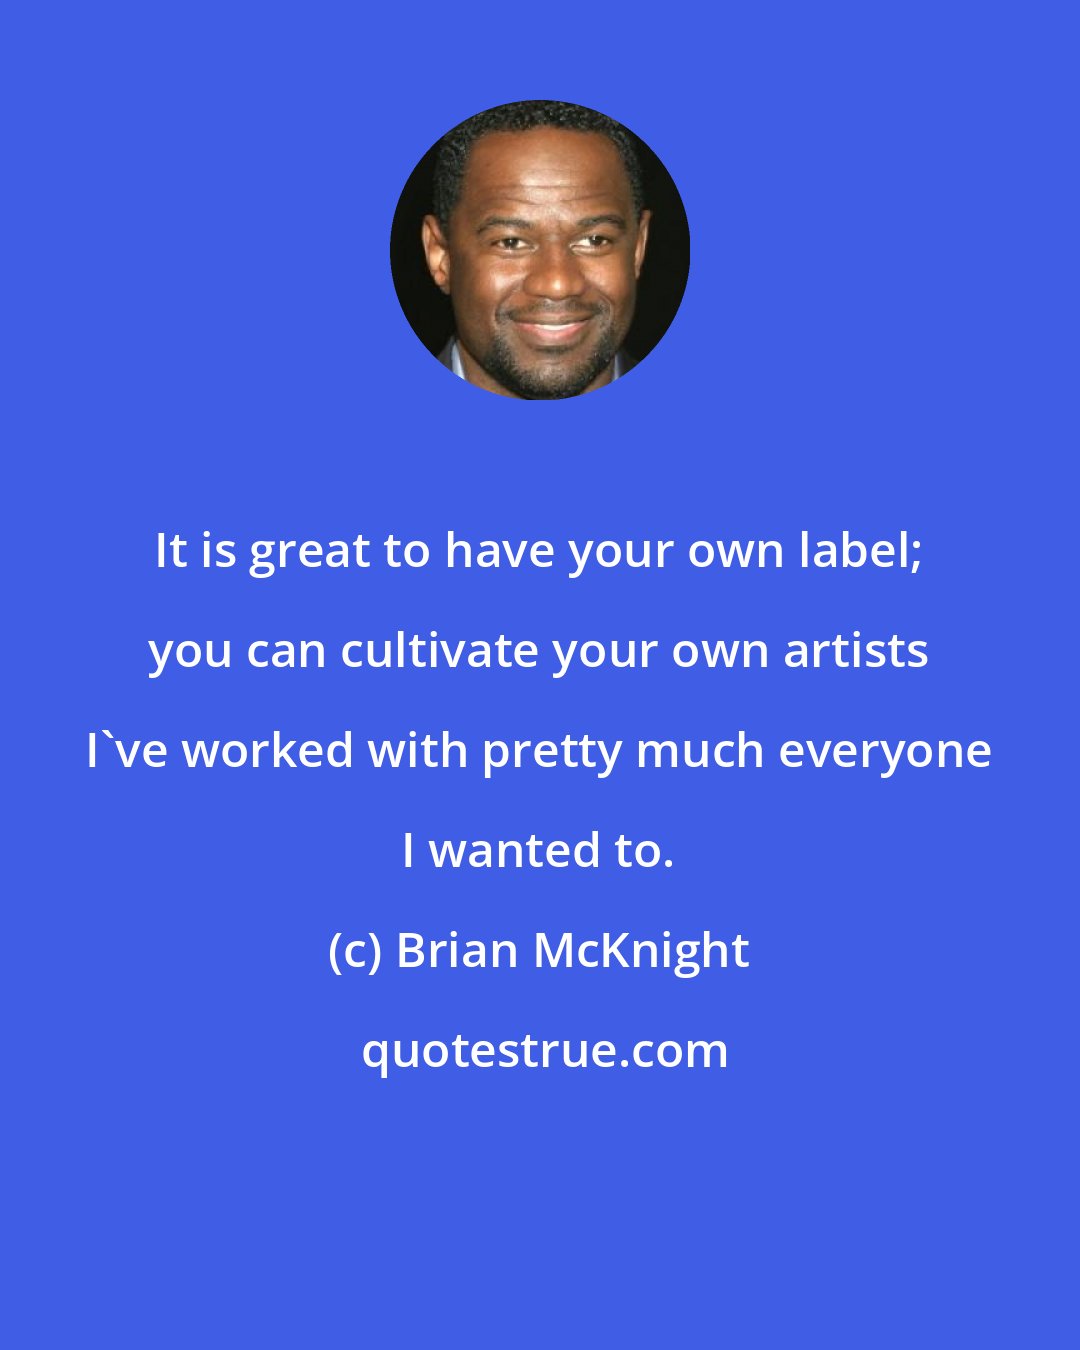 Brian McKnight: It is great to have your own label; you can cultivate your own artists I've worked with pretty much everyone I wanted to.